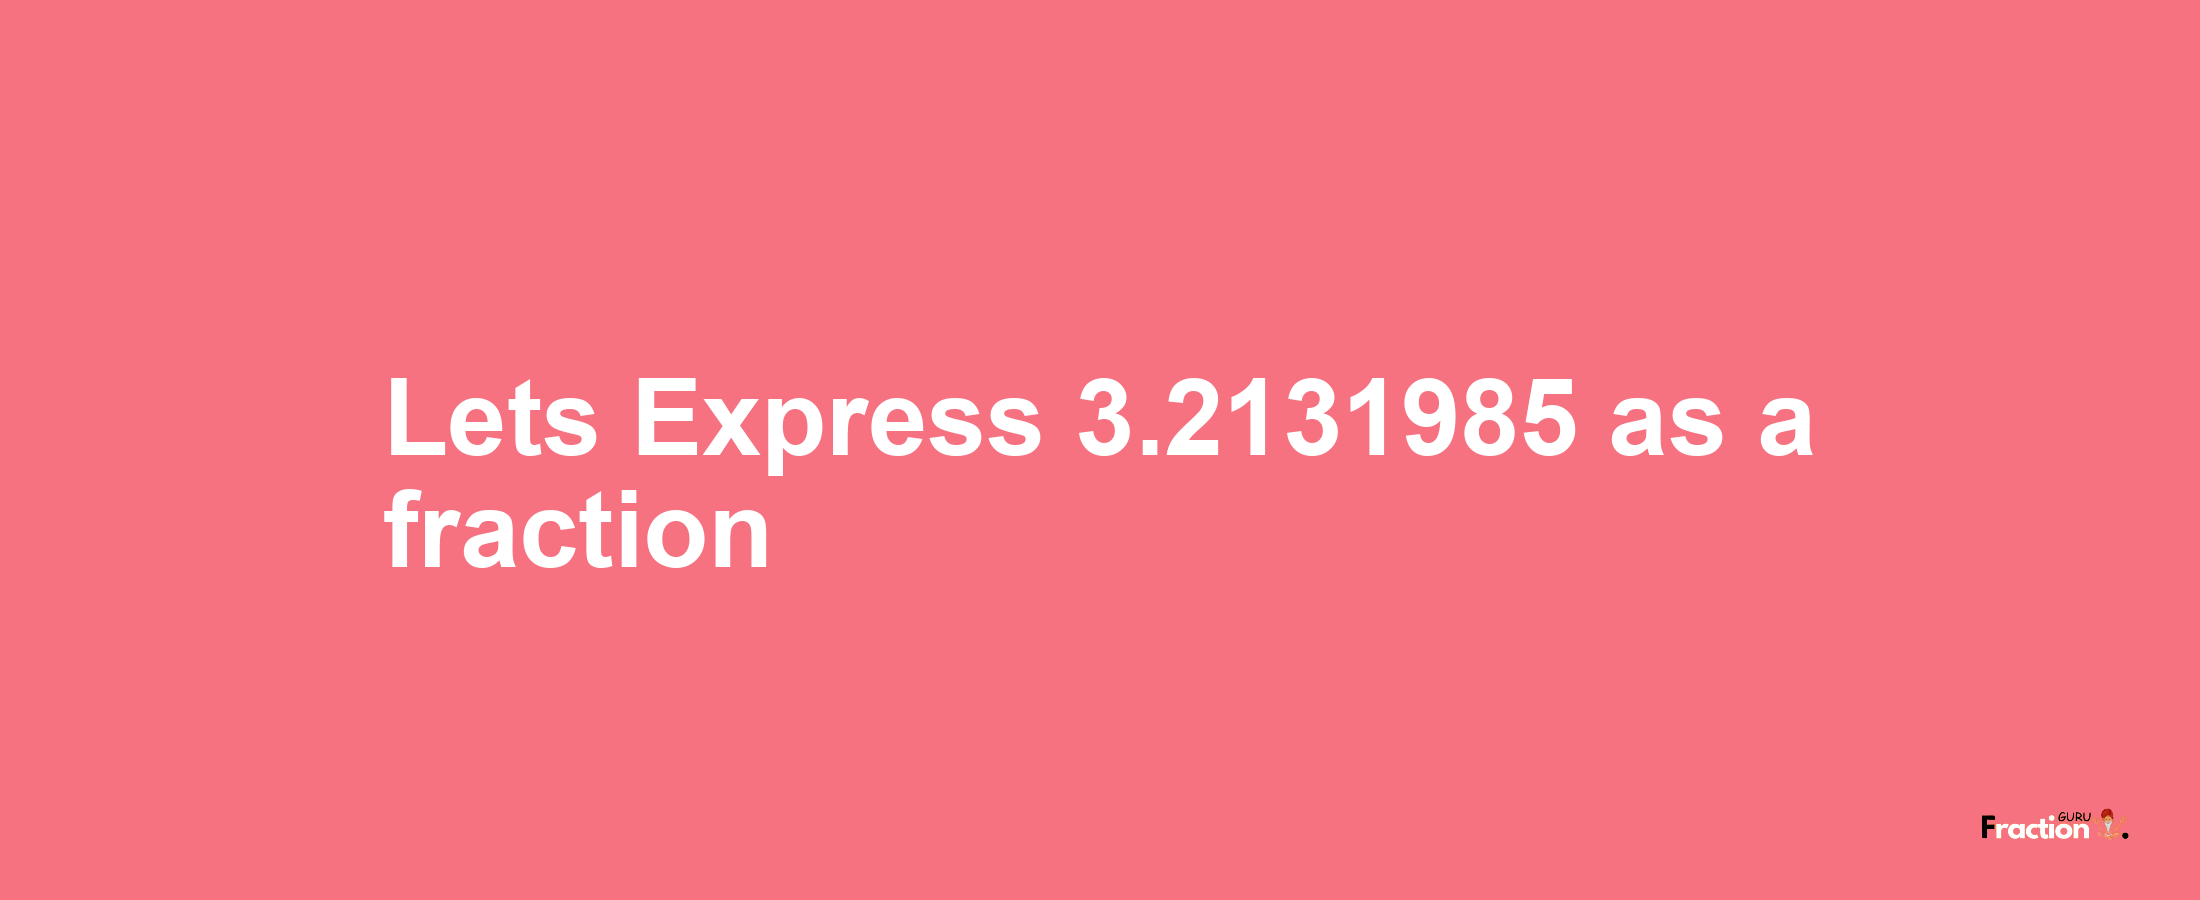 Lets Express 3.2131985 as afraction